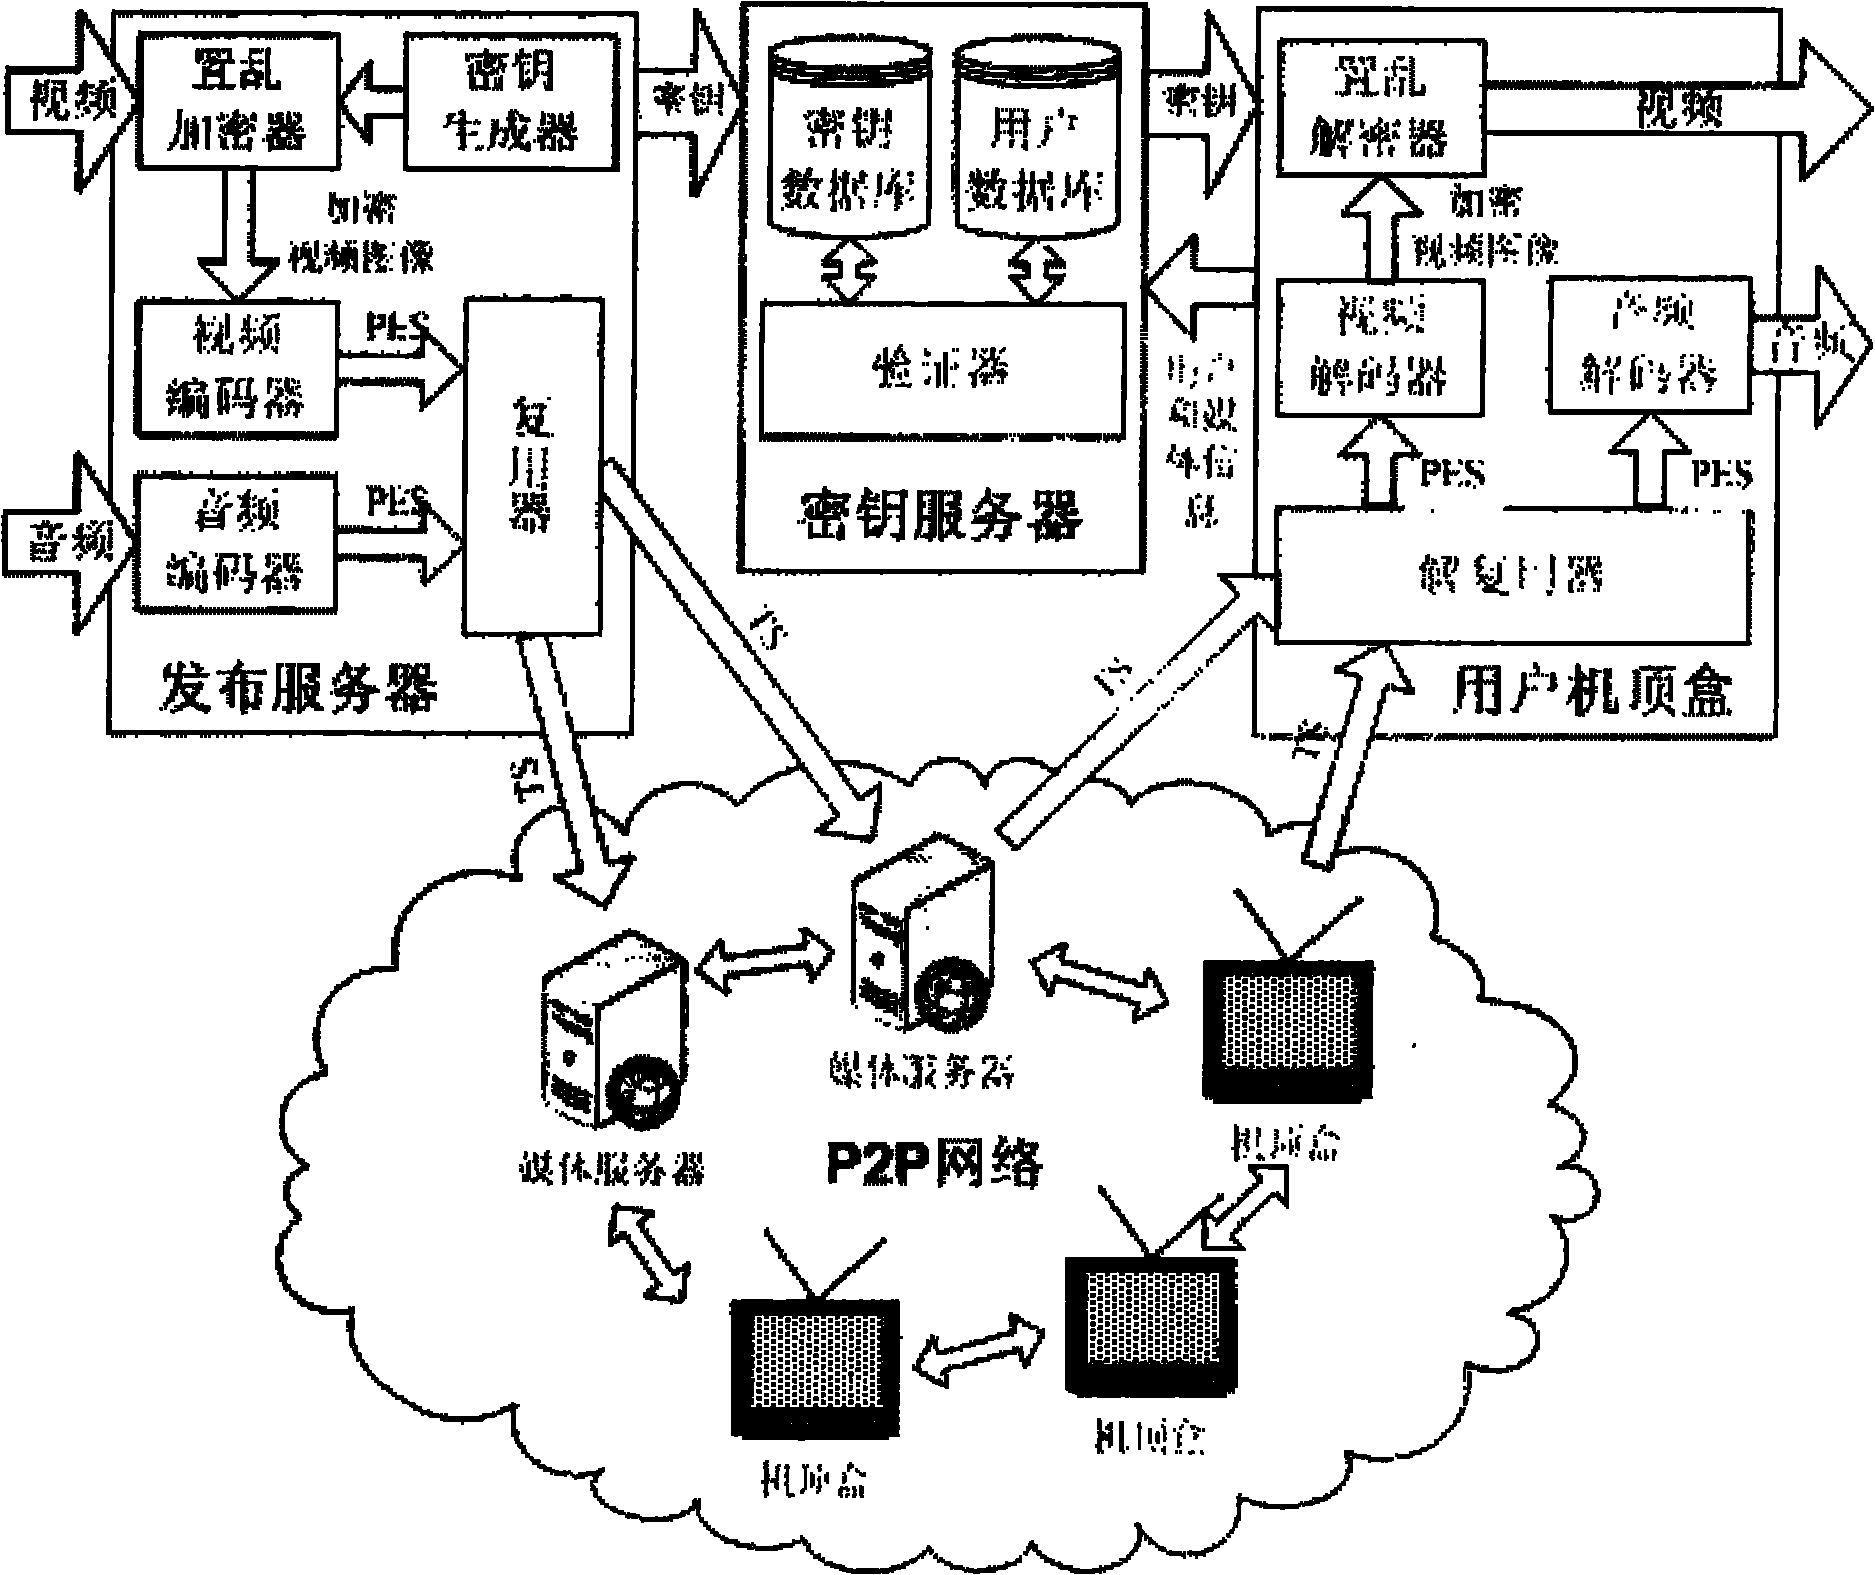 Method for security protection of video data of set top box for peer-to-peer computing